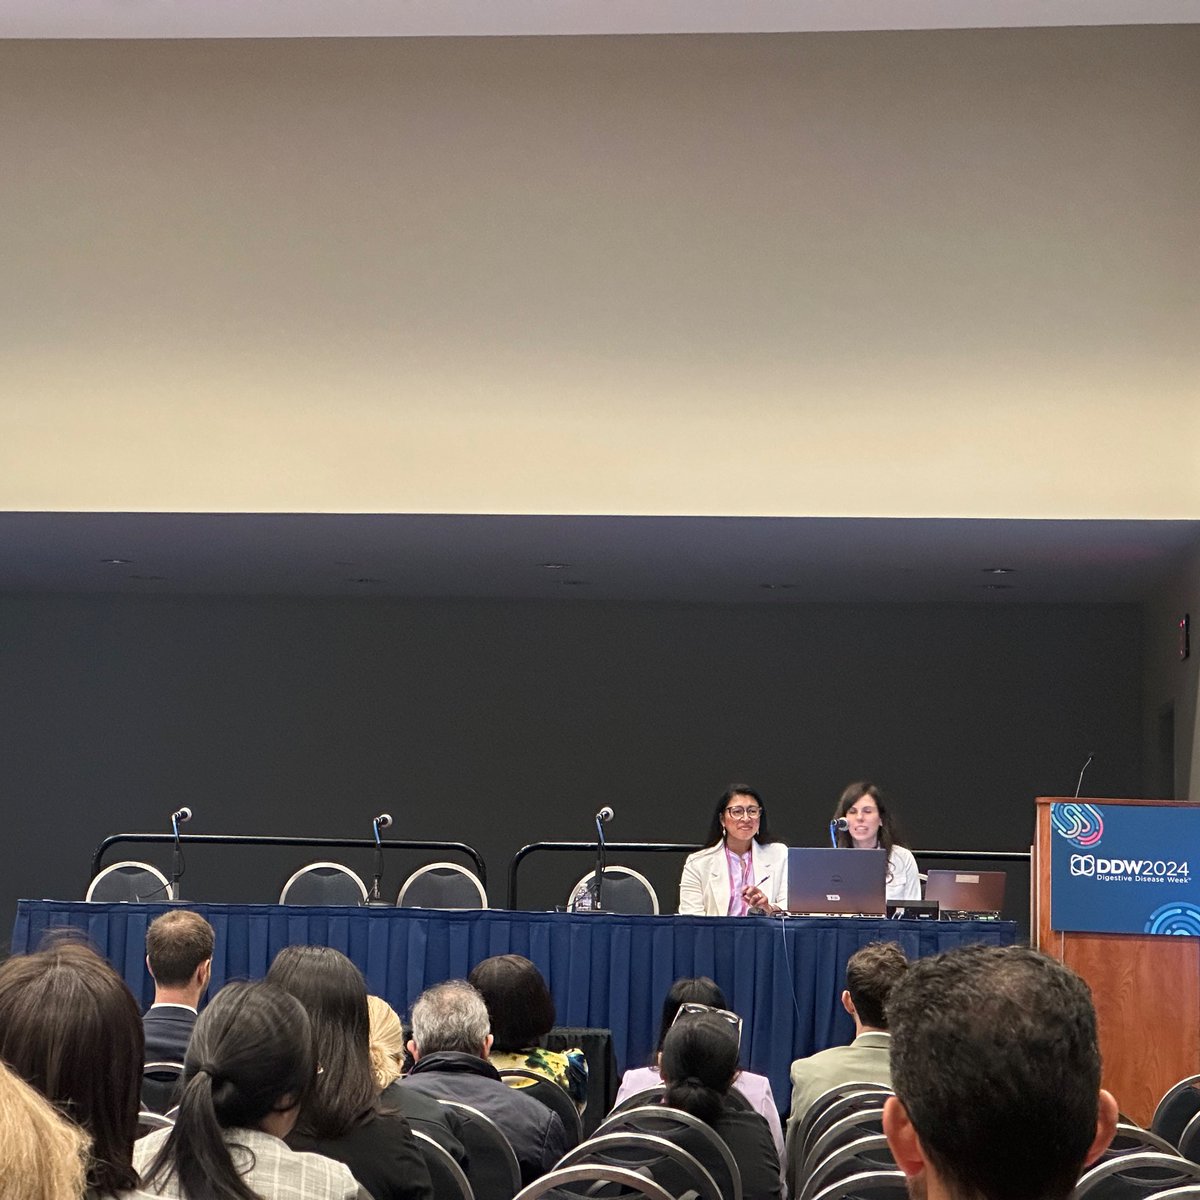 I spy @swatigp and Caitlin Murphy co chairing a session at @DDWMeeting on early onset #colorectalcancer #aya #healthequity @FightCRC